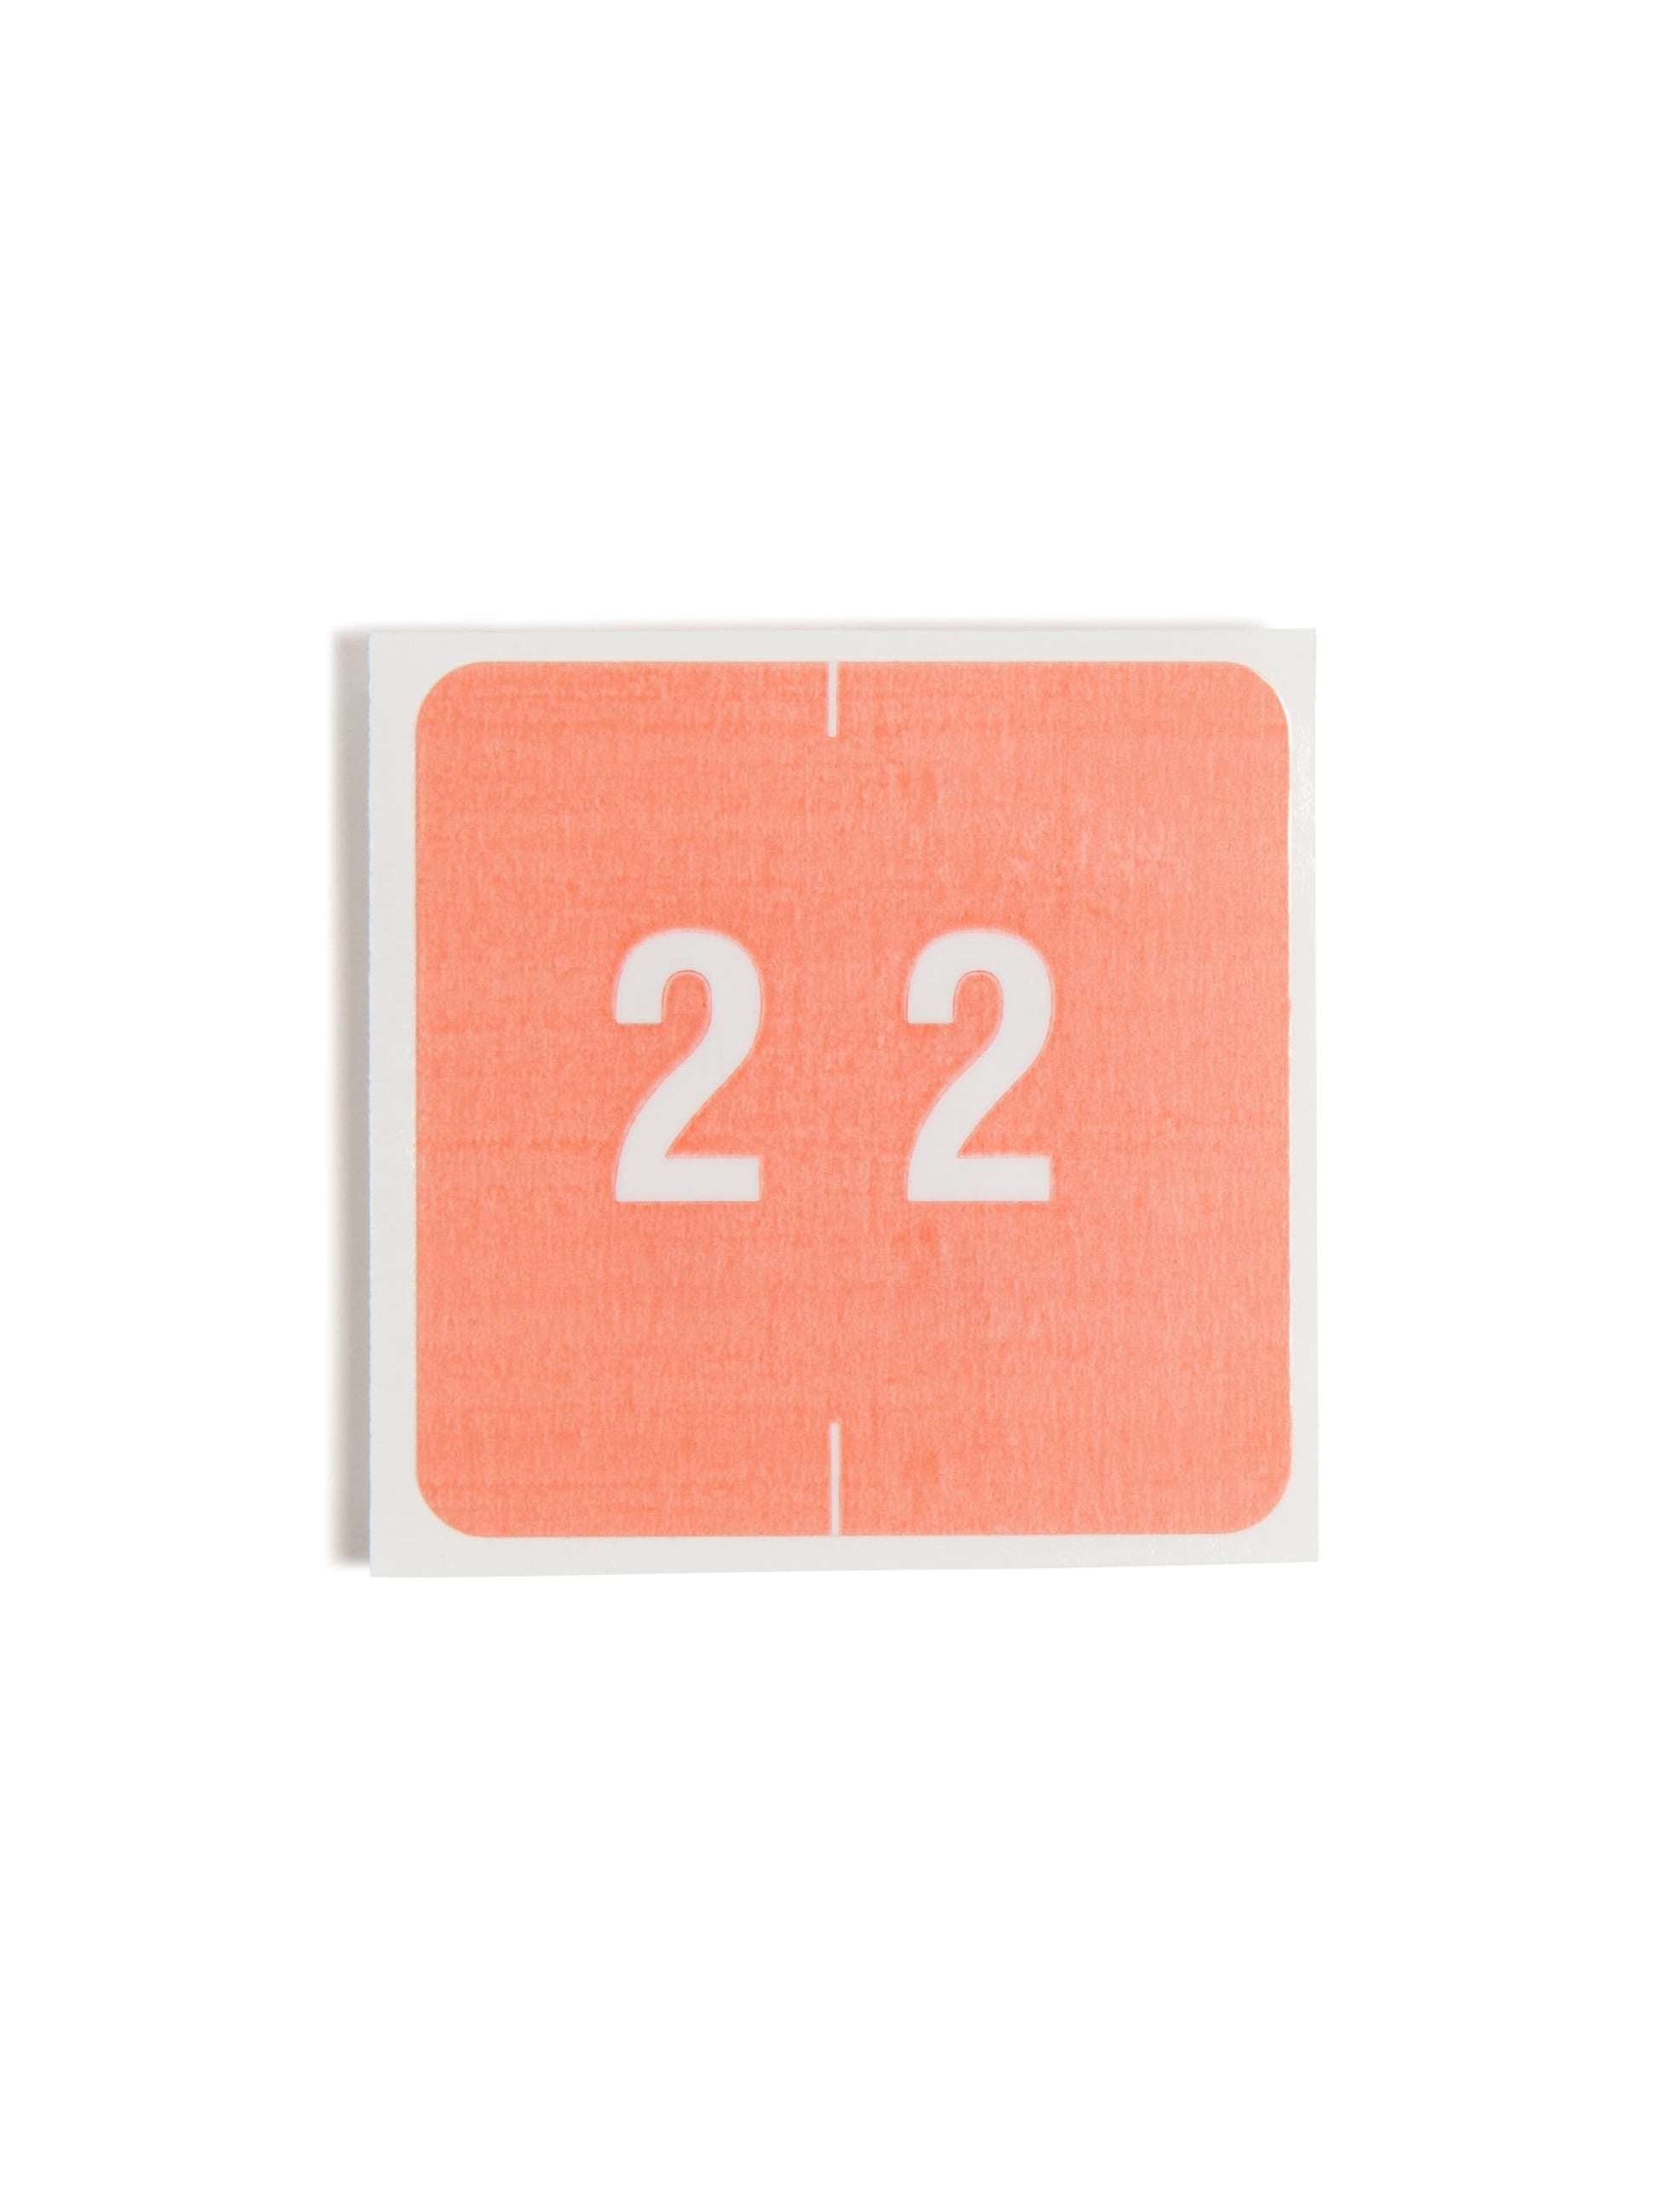 DCC Color-Coded Numeric Labels - Rolls, Pink Color, 1-1/2" X 1-1/2" Size, Set of 1, 086486674225